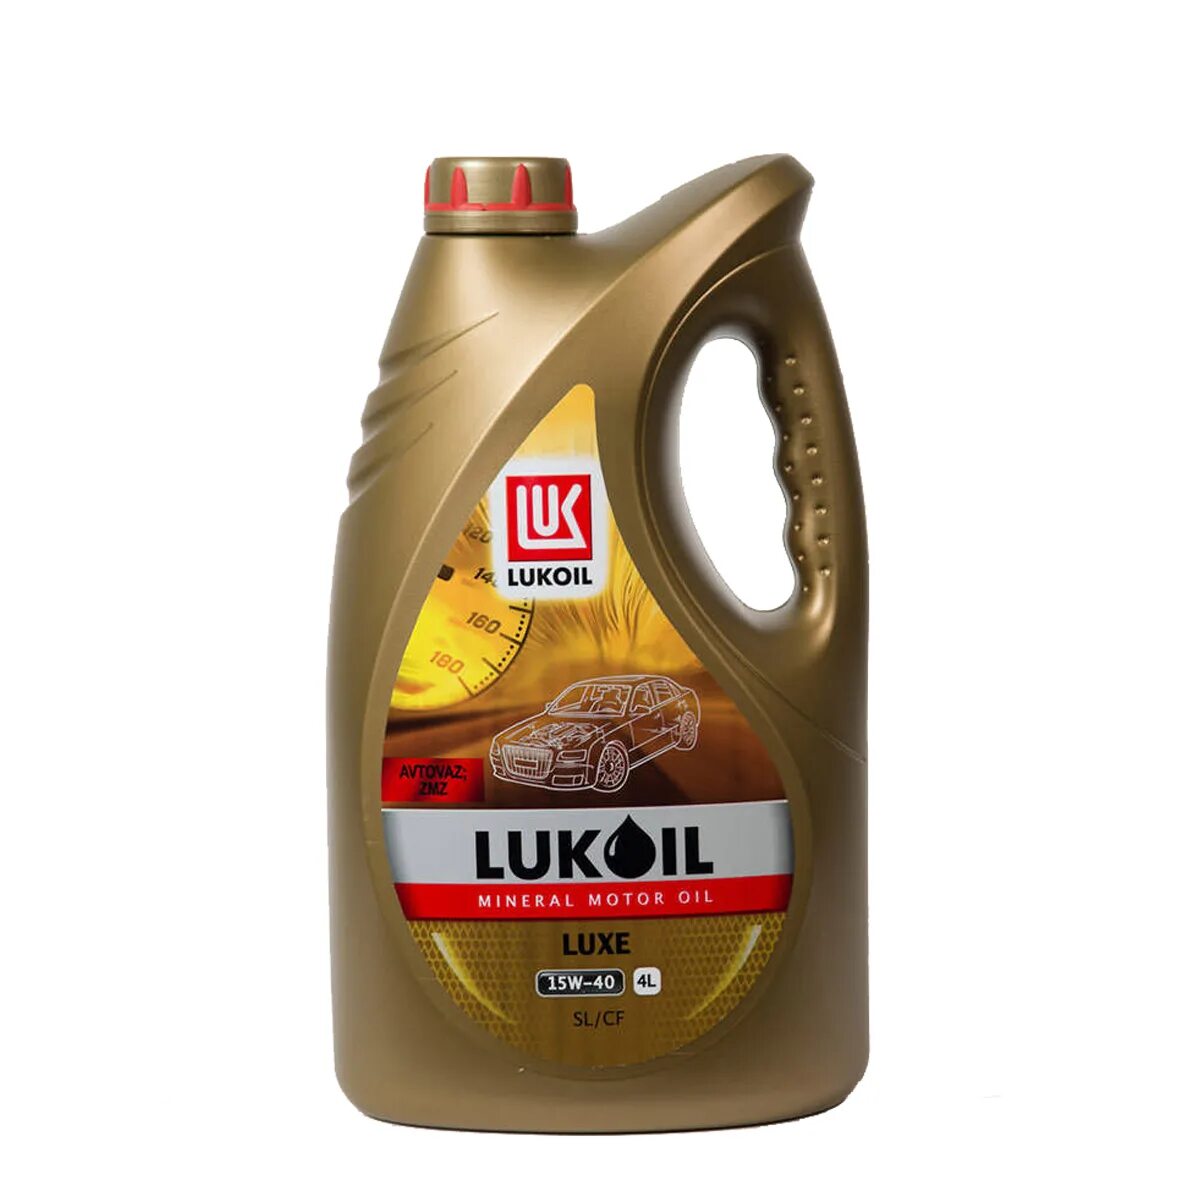 Lukoil Luxe 15w-40. Лукойл Люкс 10w30. Lukoil. Sae15w40. Масло Luxe 15w40 минеральное. Масло моторное лукойл cf 4